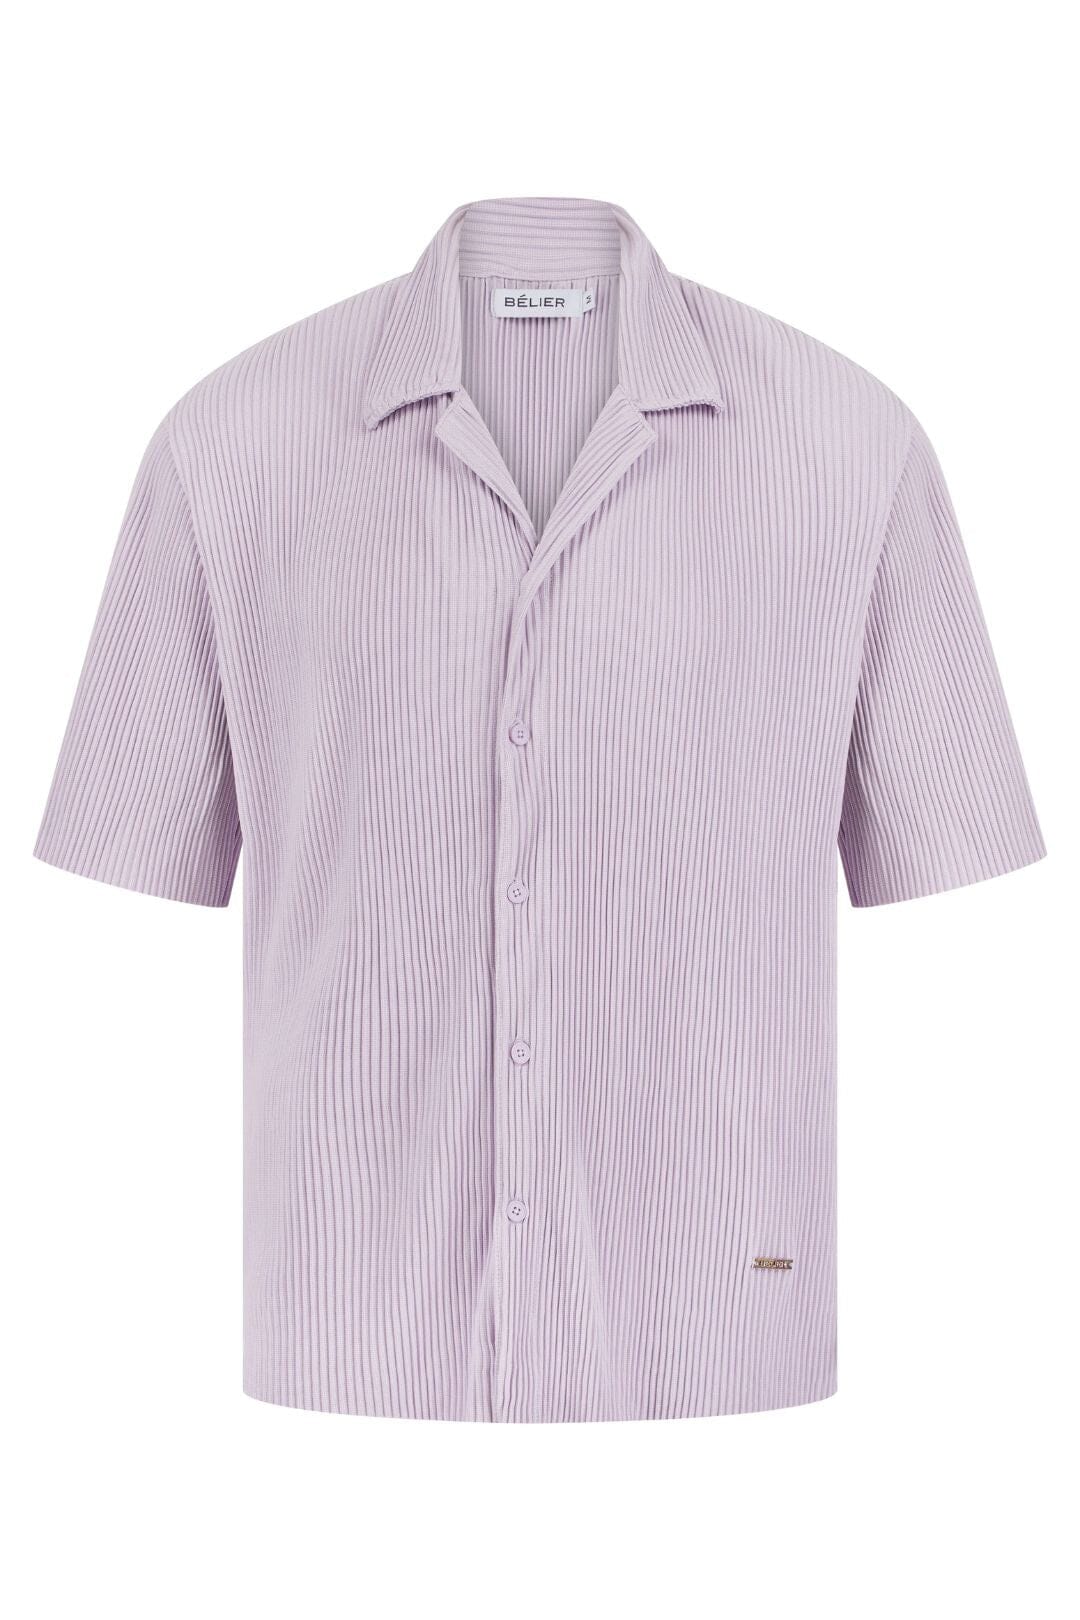 Lilac Pleated S/S Resort Shirt